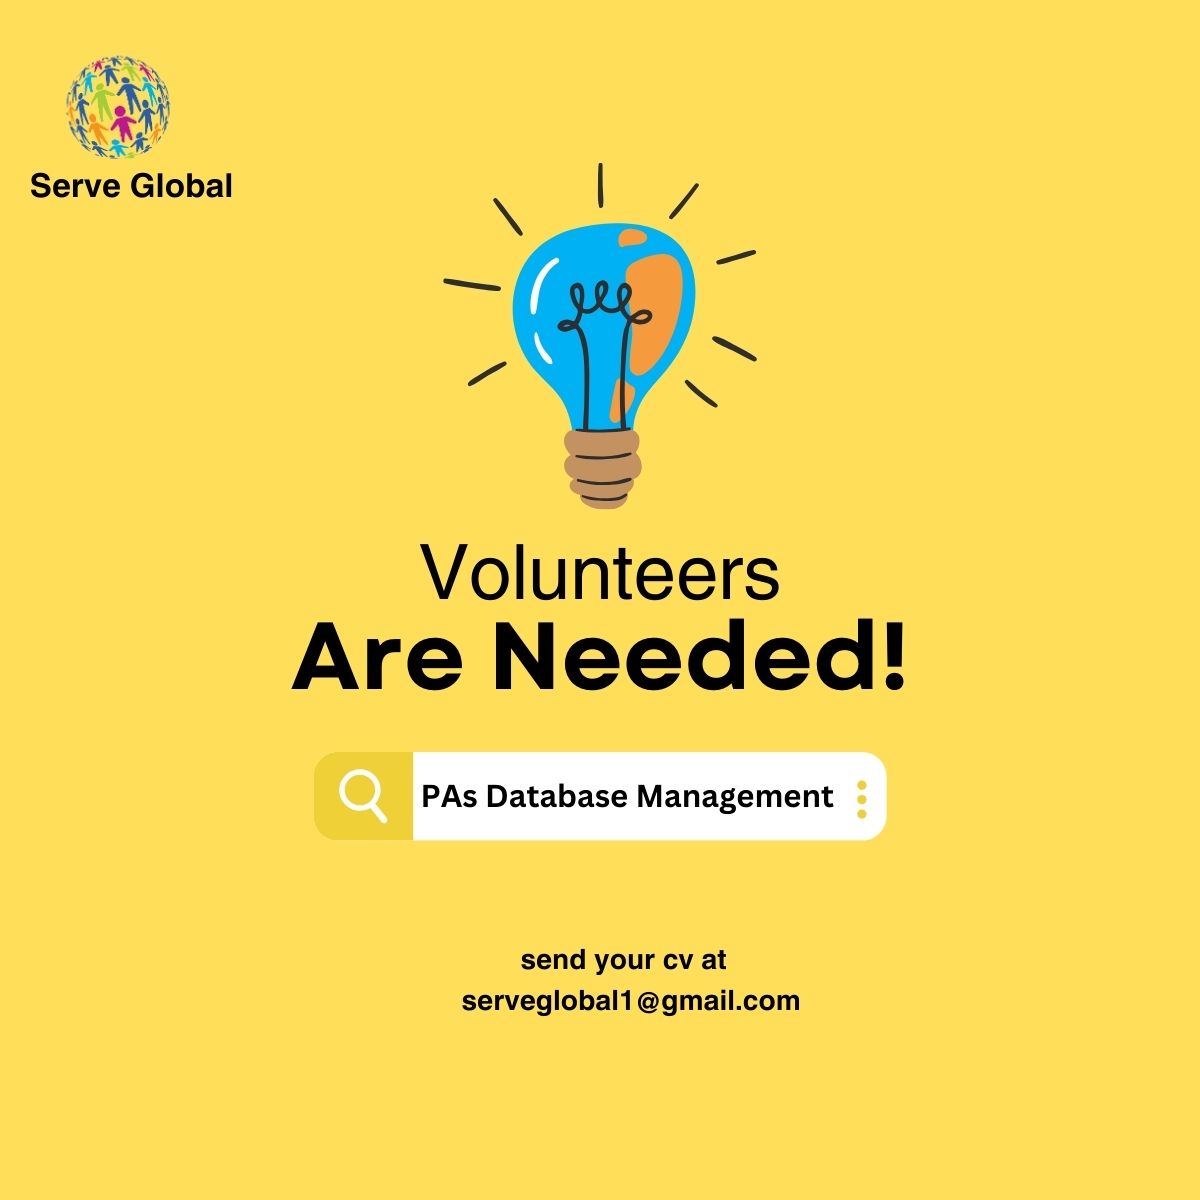 ASCO wants 10 volunteers to manage its Database  Responsibilities:  •  managing database   Qualification  IT background is preferable   Duration  Maximum 3 days  We offer: •  Certificate and recommendation letter •  Networking with like minded pe